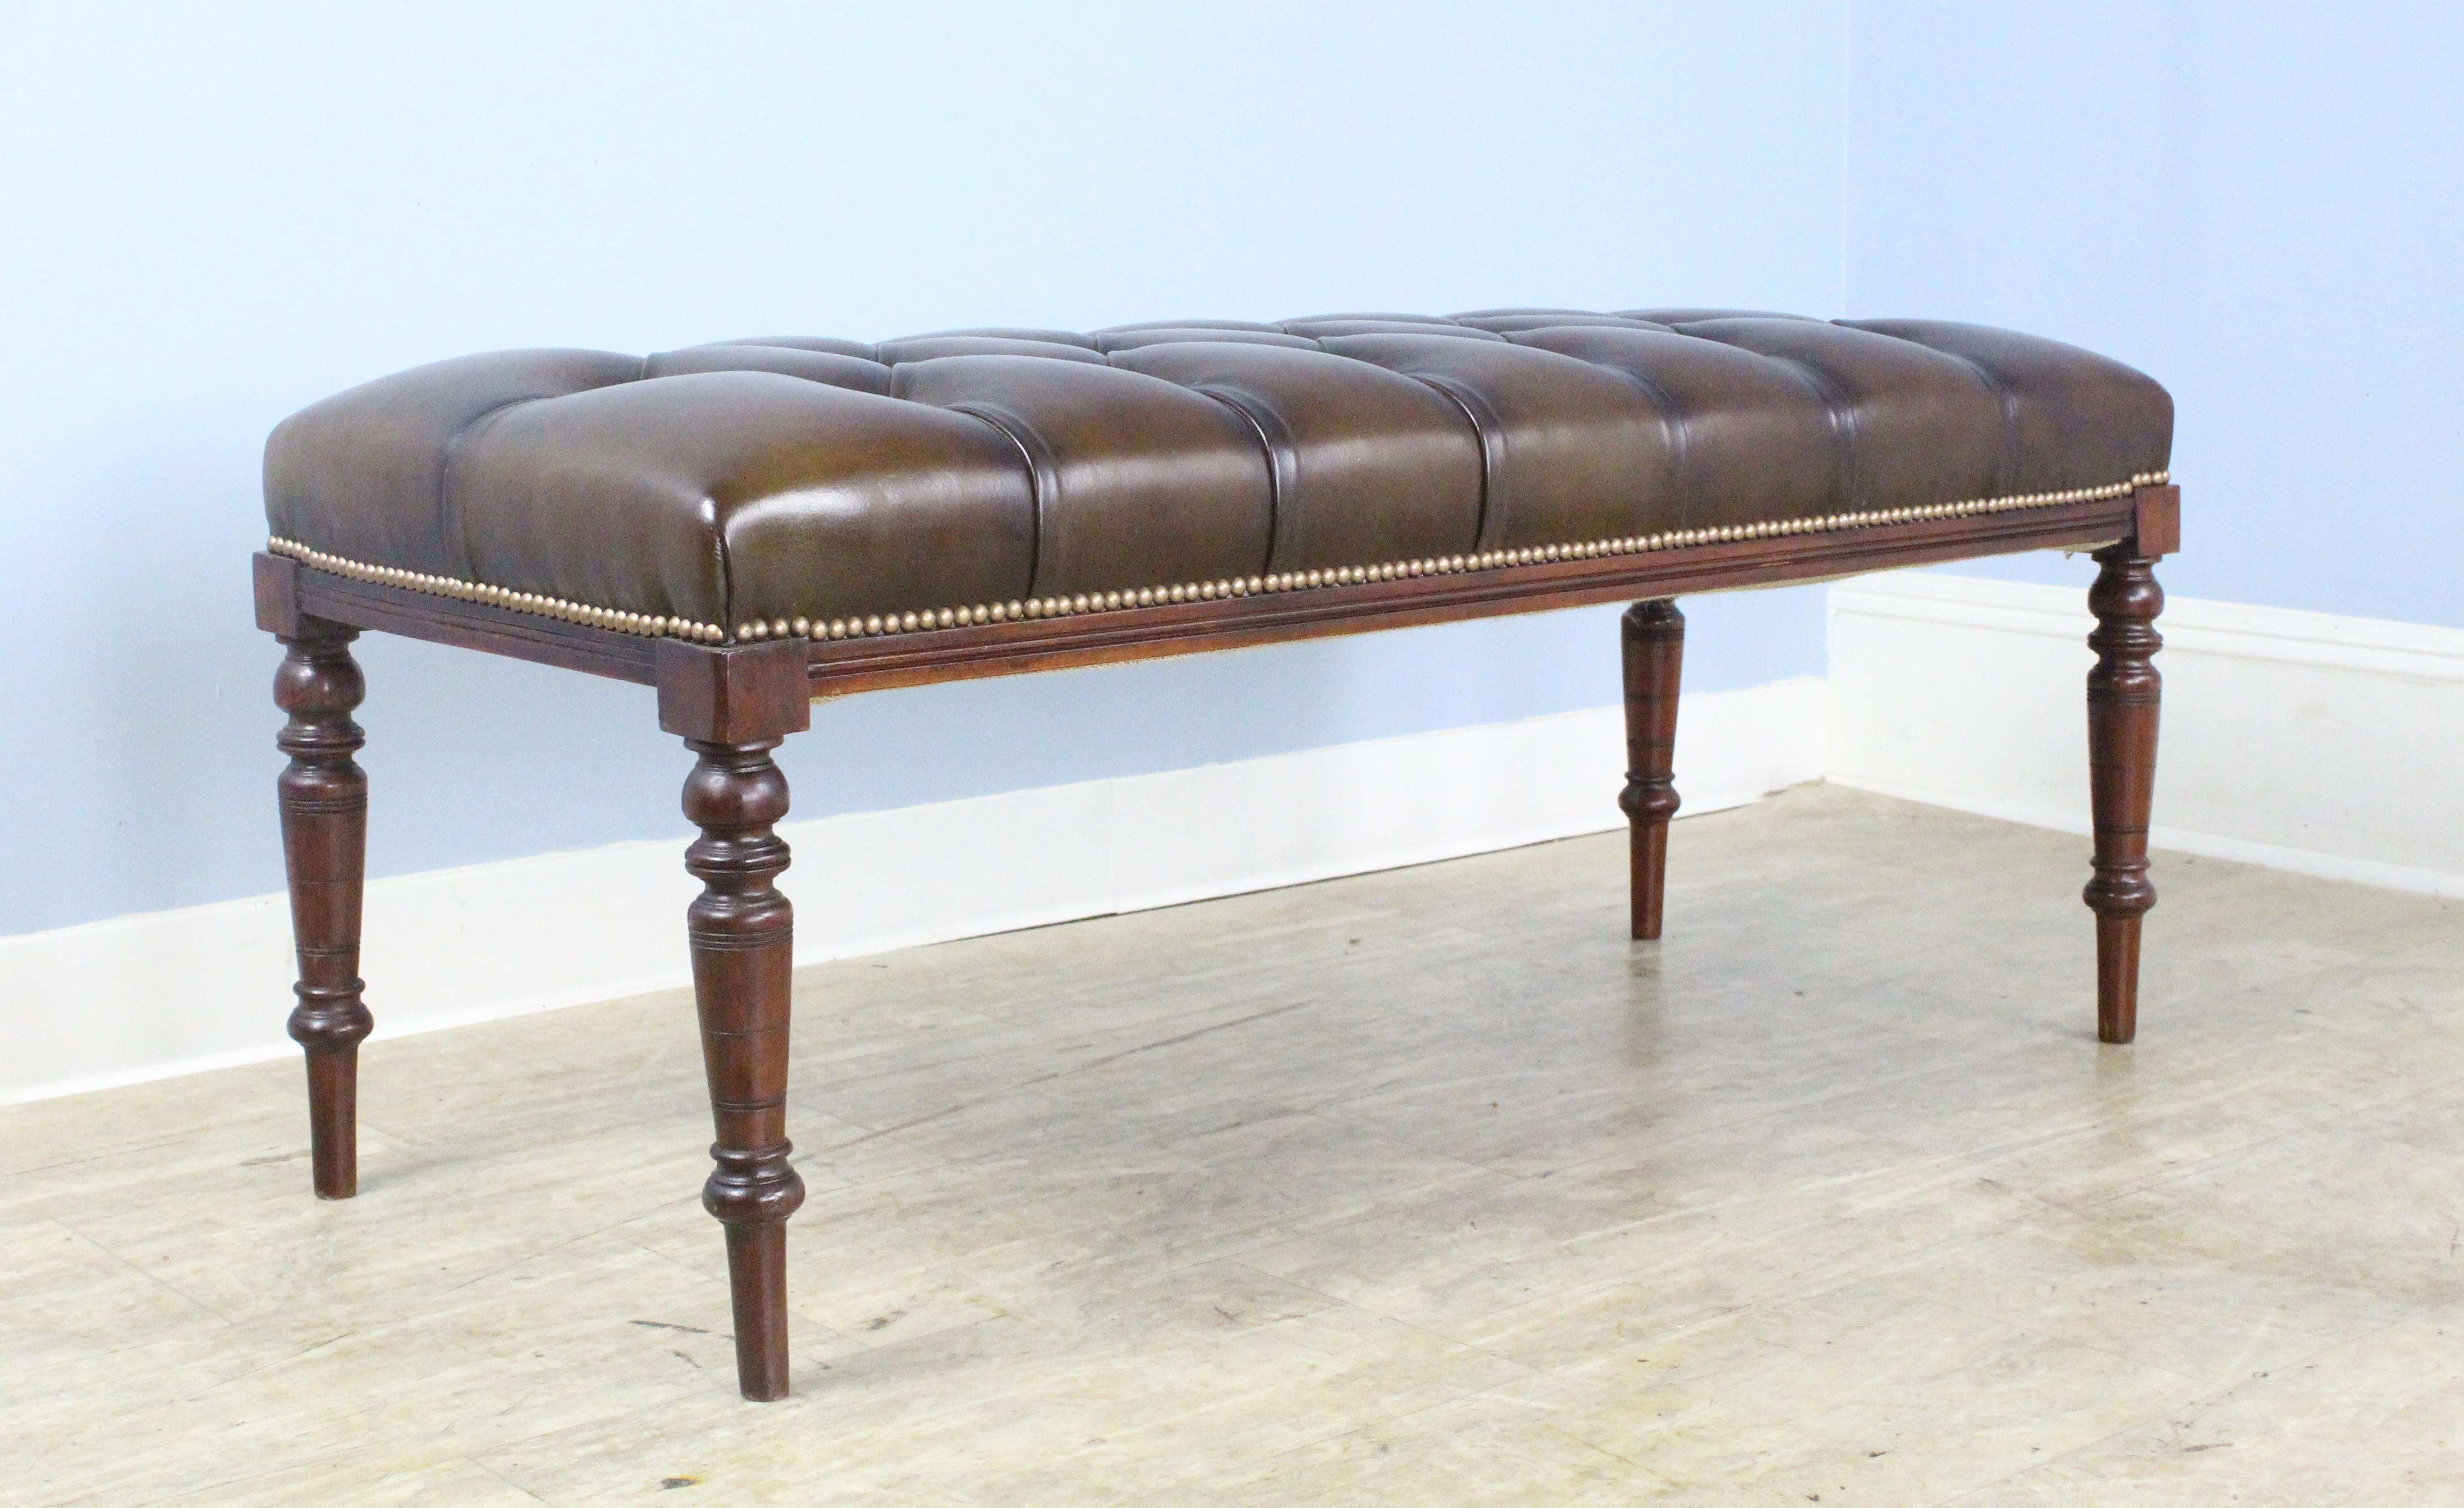 A handsome mahogany bench with turned legs, newly upholstered in tufted brown leather. The leather is in sparkling condition, with decorative rivets at the legs. height is good for seating or as a coffee table, with or without a tray on top.